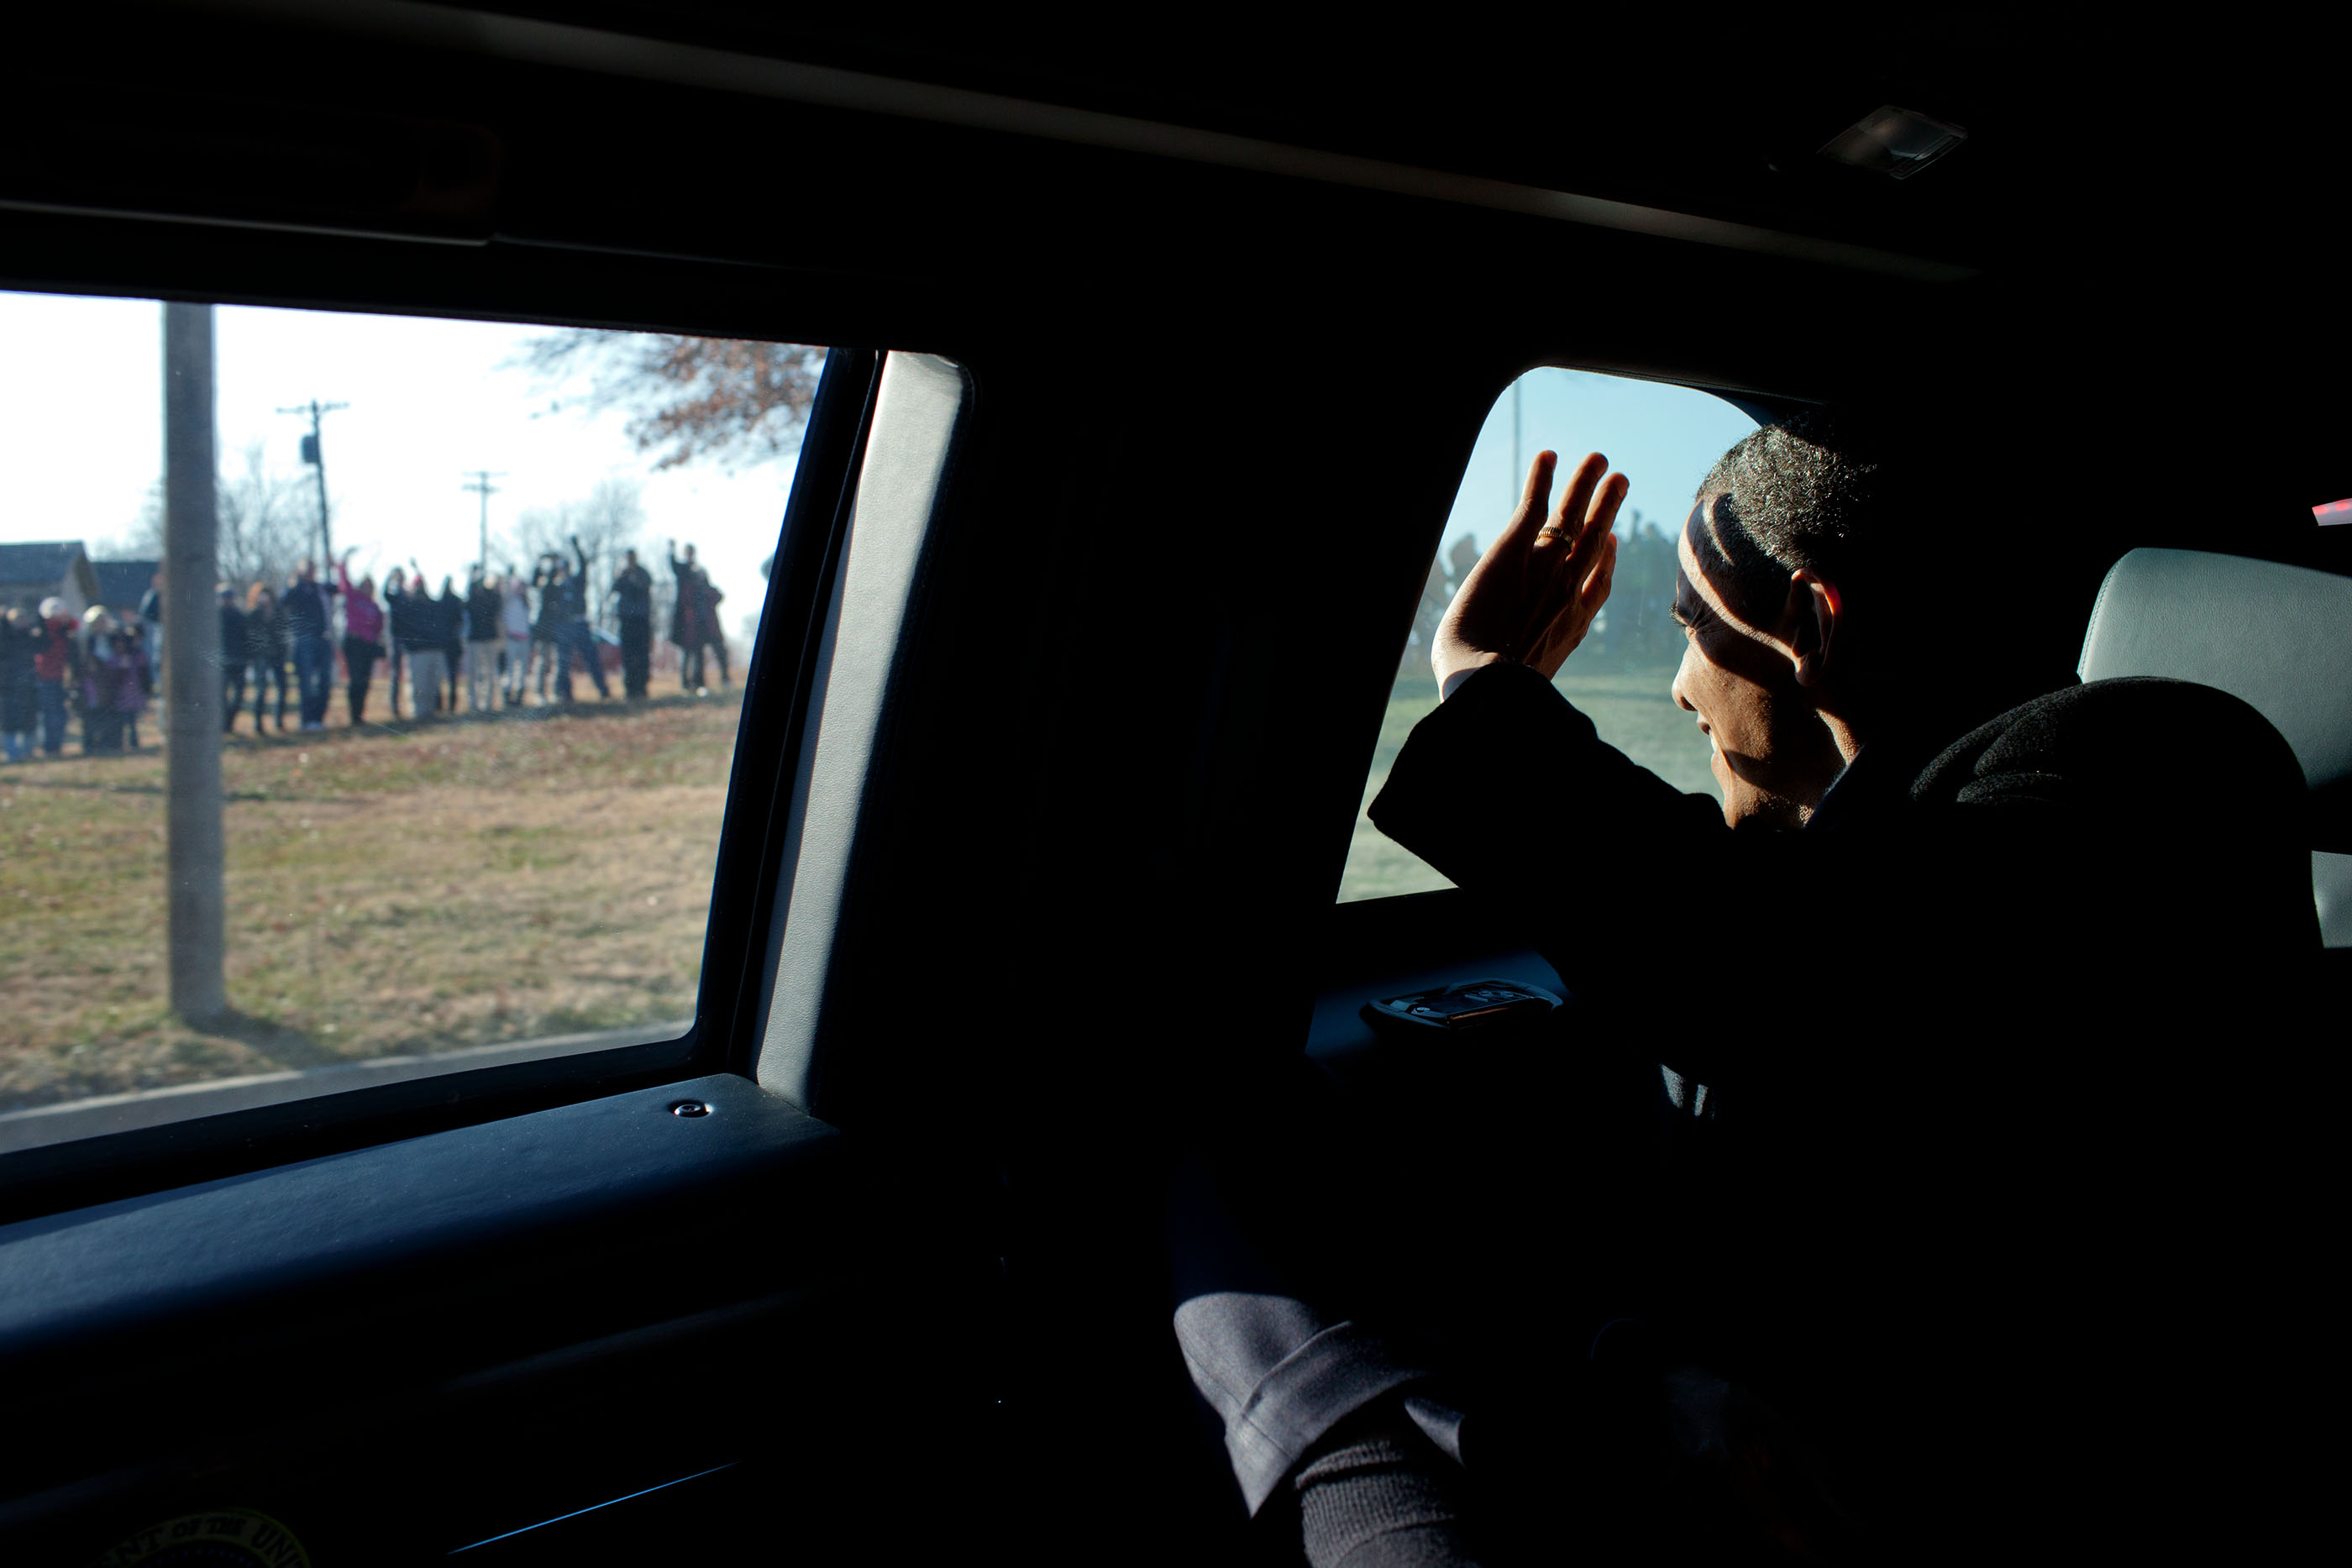 Kansas, Dec. 6, 2011. Waving to Kansans after his economic speech in Osawatomie. (Official White House Photo by Pete Souza)